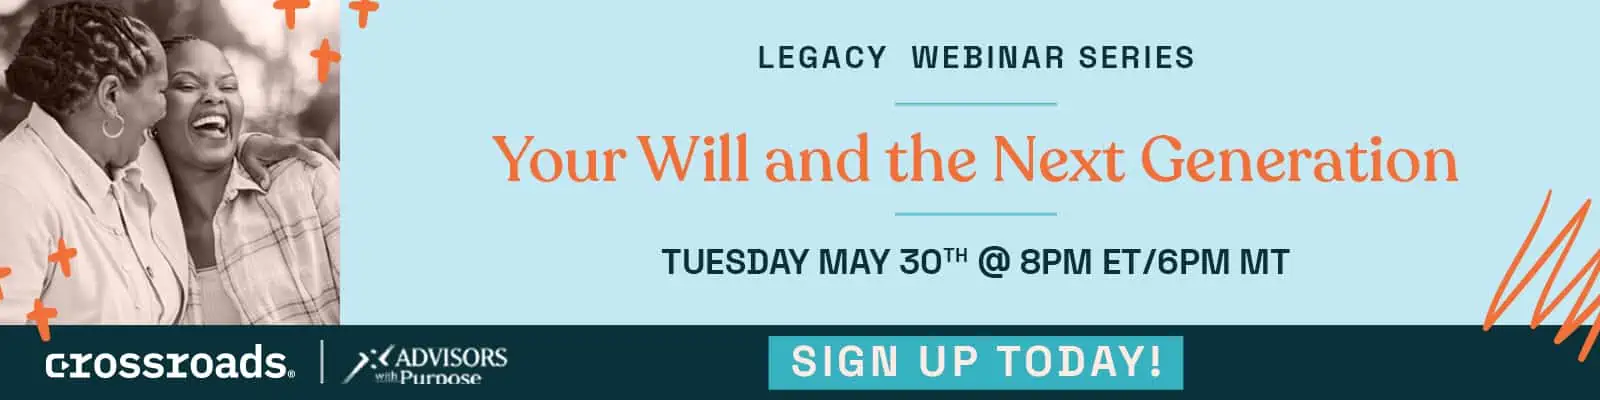 Webinar Series - Your Will And The Next Generation